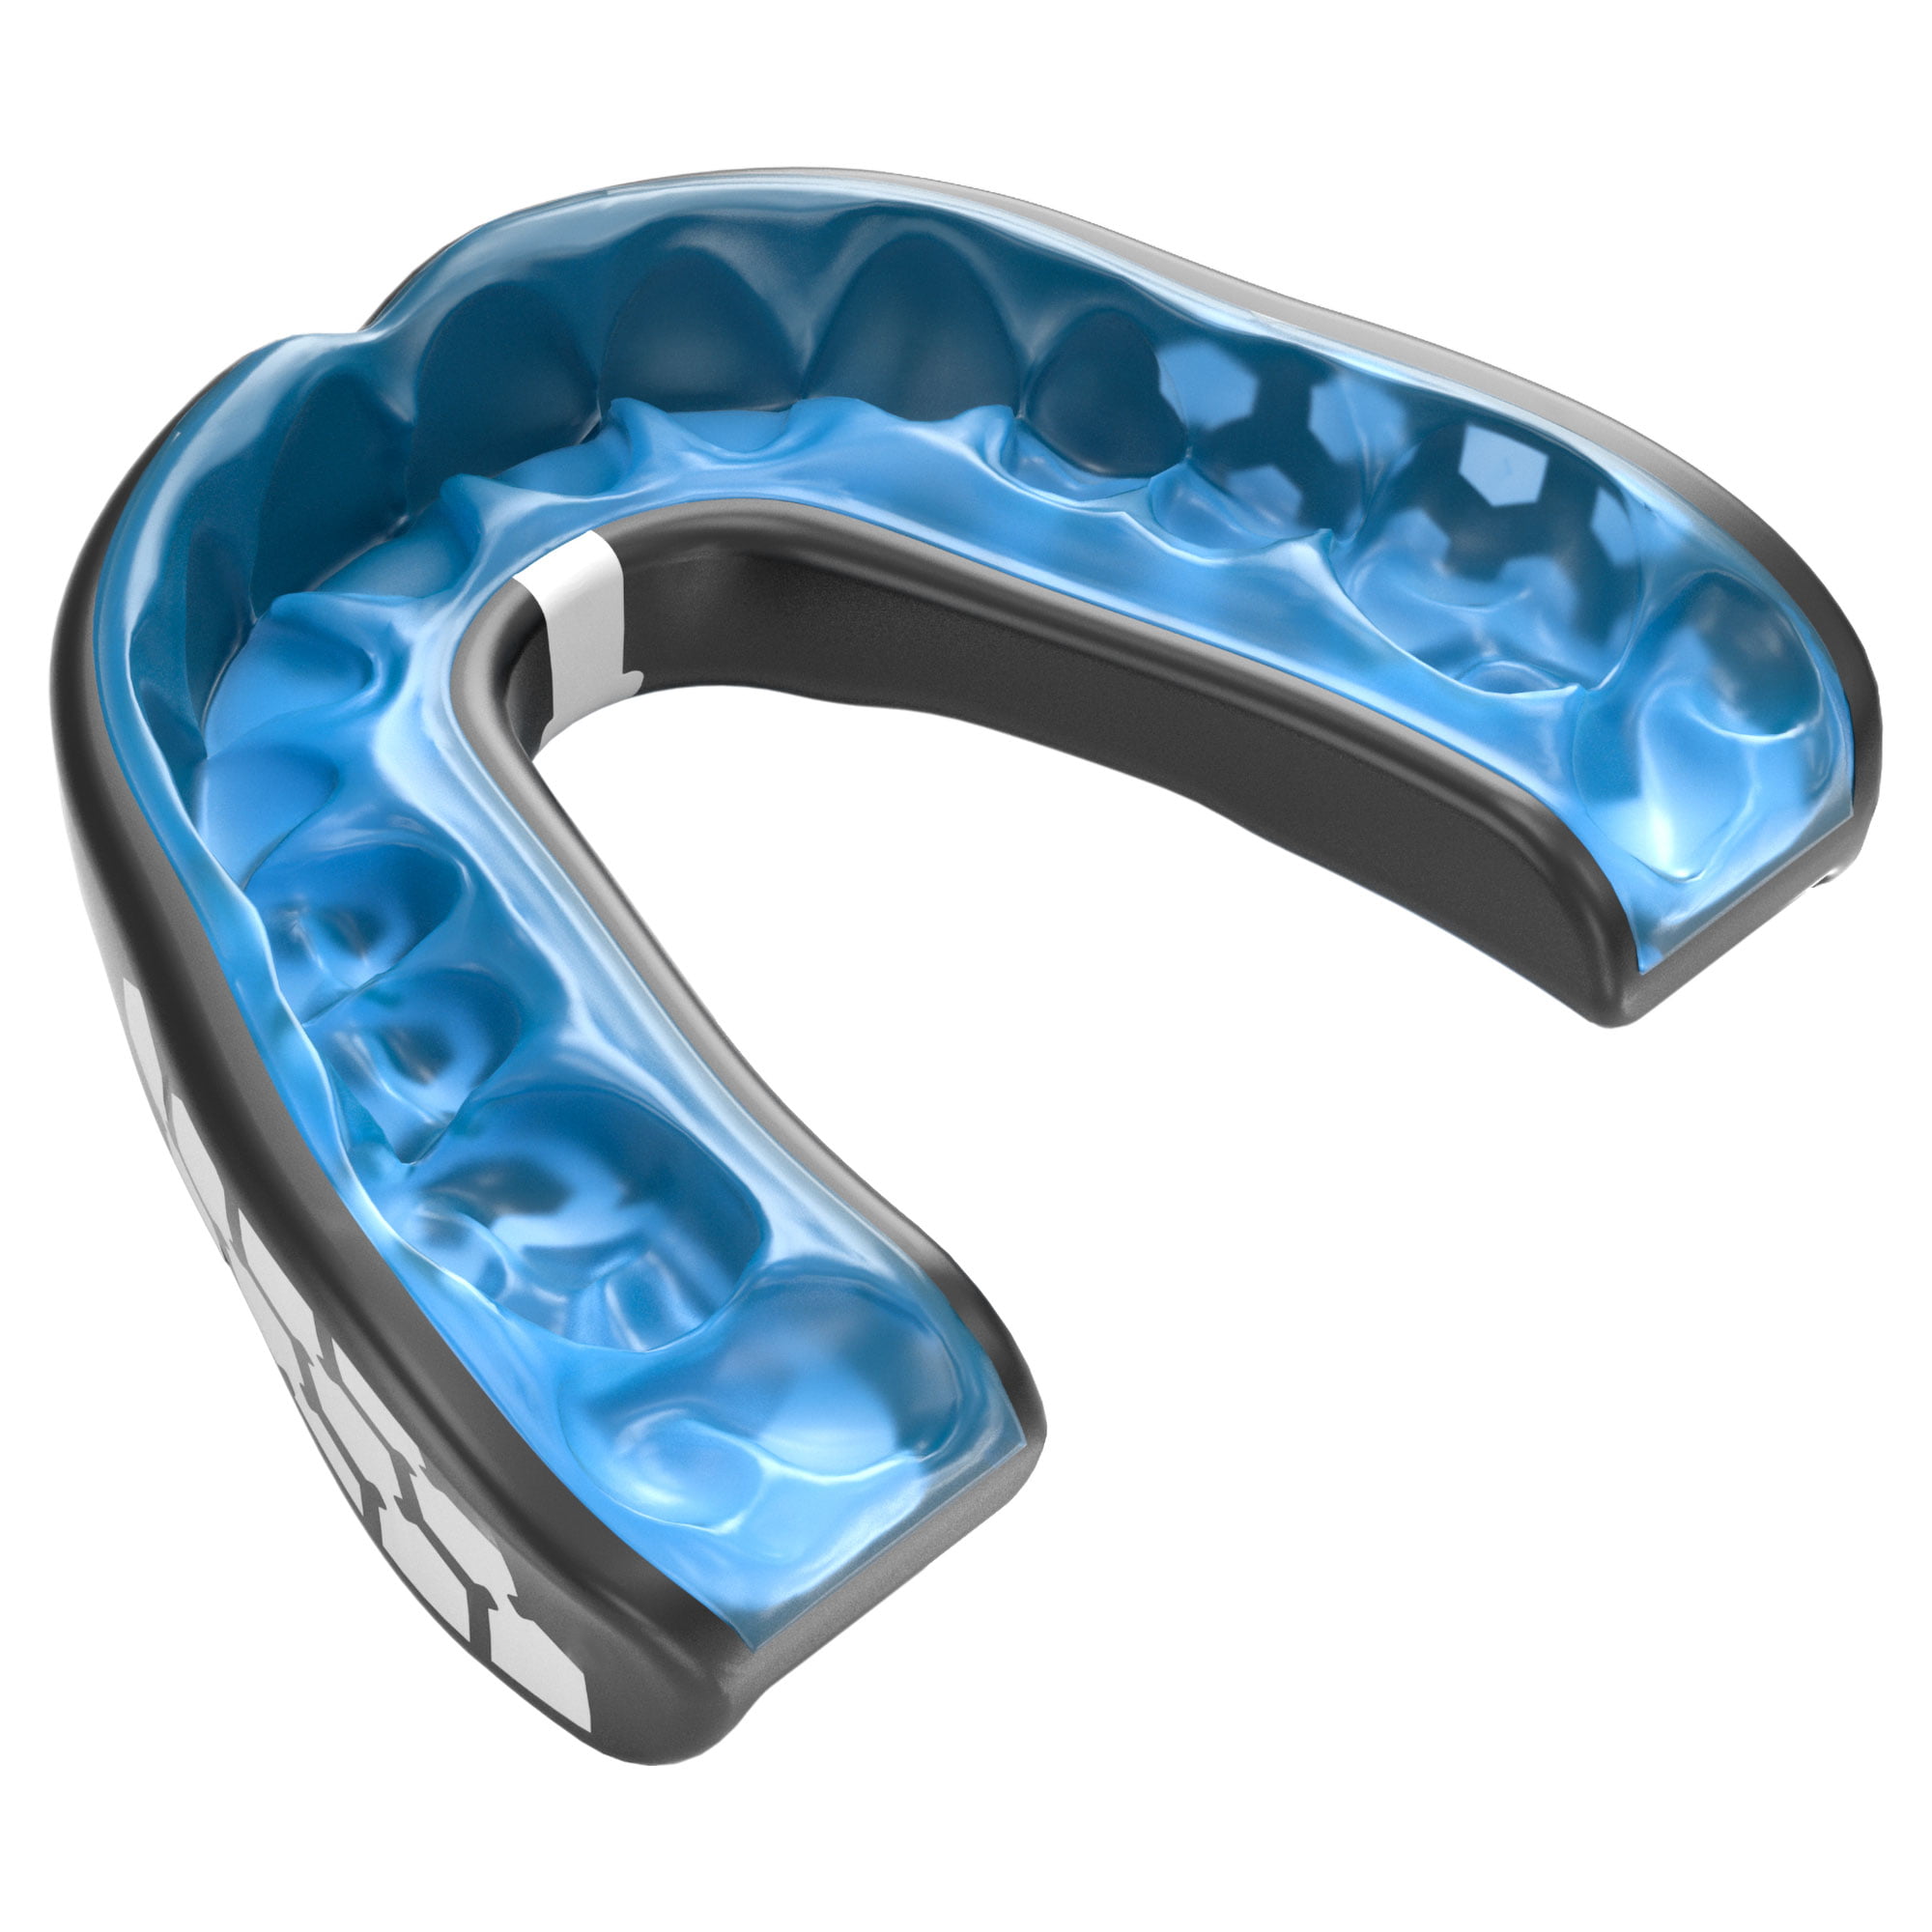 Mouthguard for different sports Youth & Adult Sizes Shock Doctor Gel Max Mouthguard 